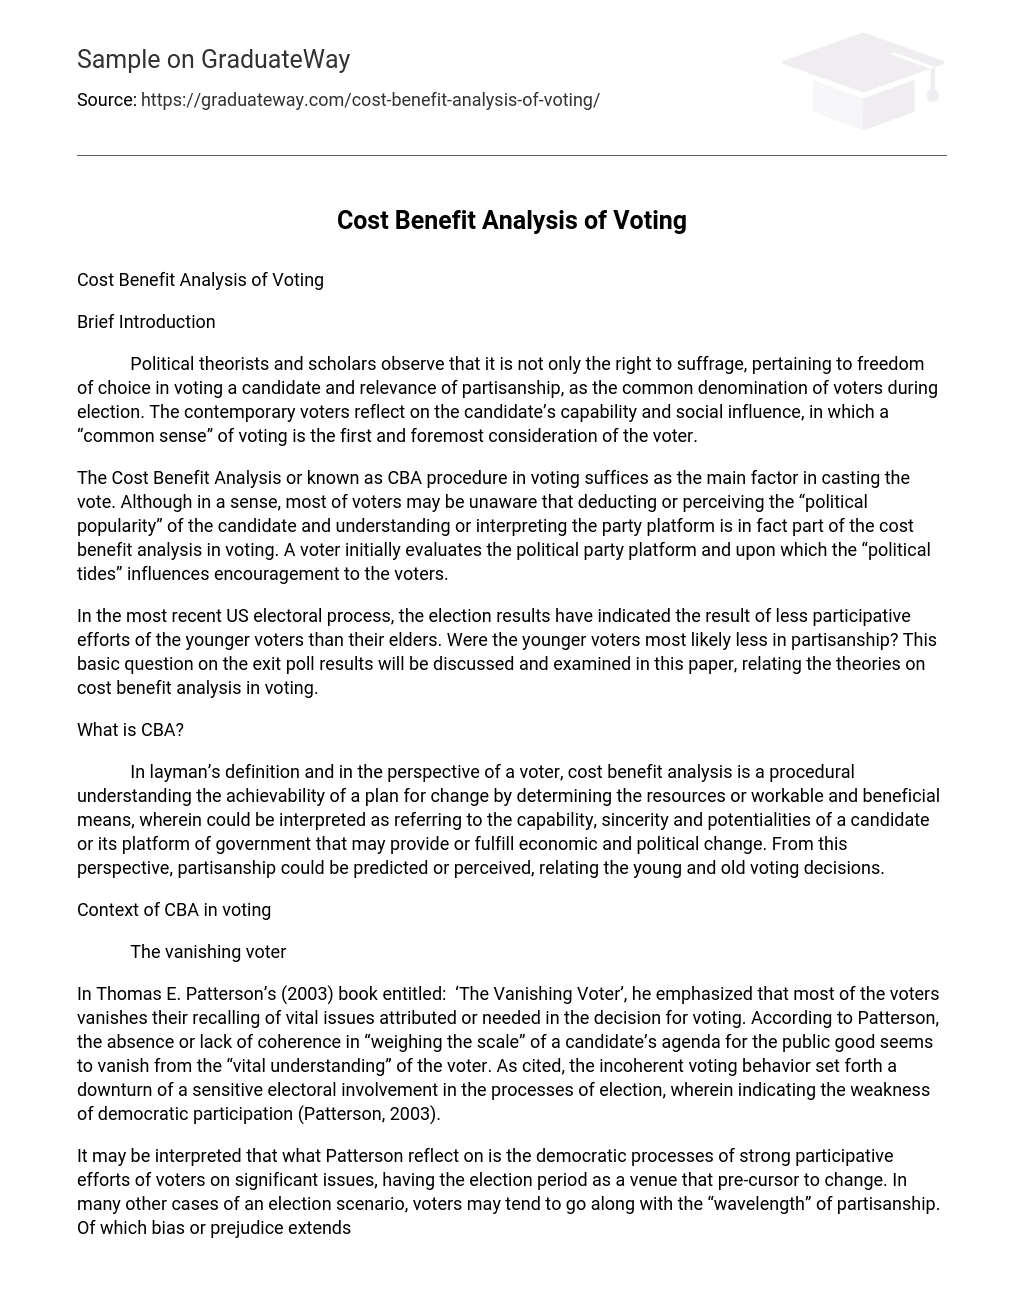 Cost Benefit Analysis of Voting